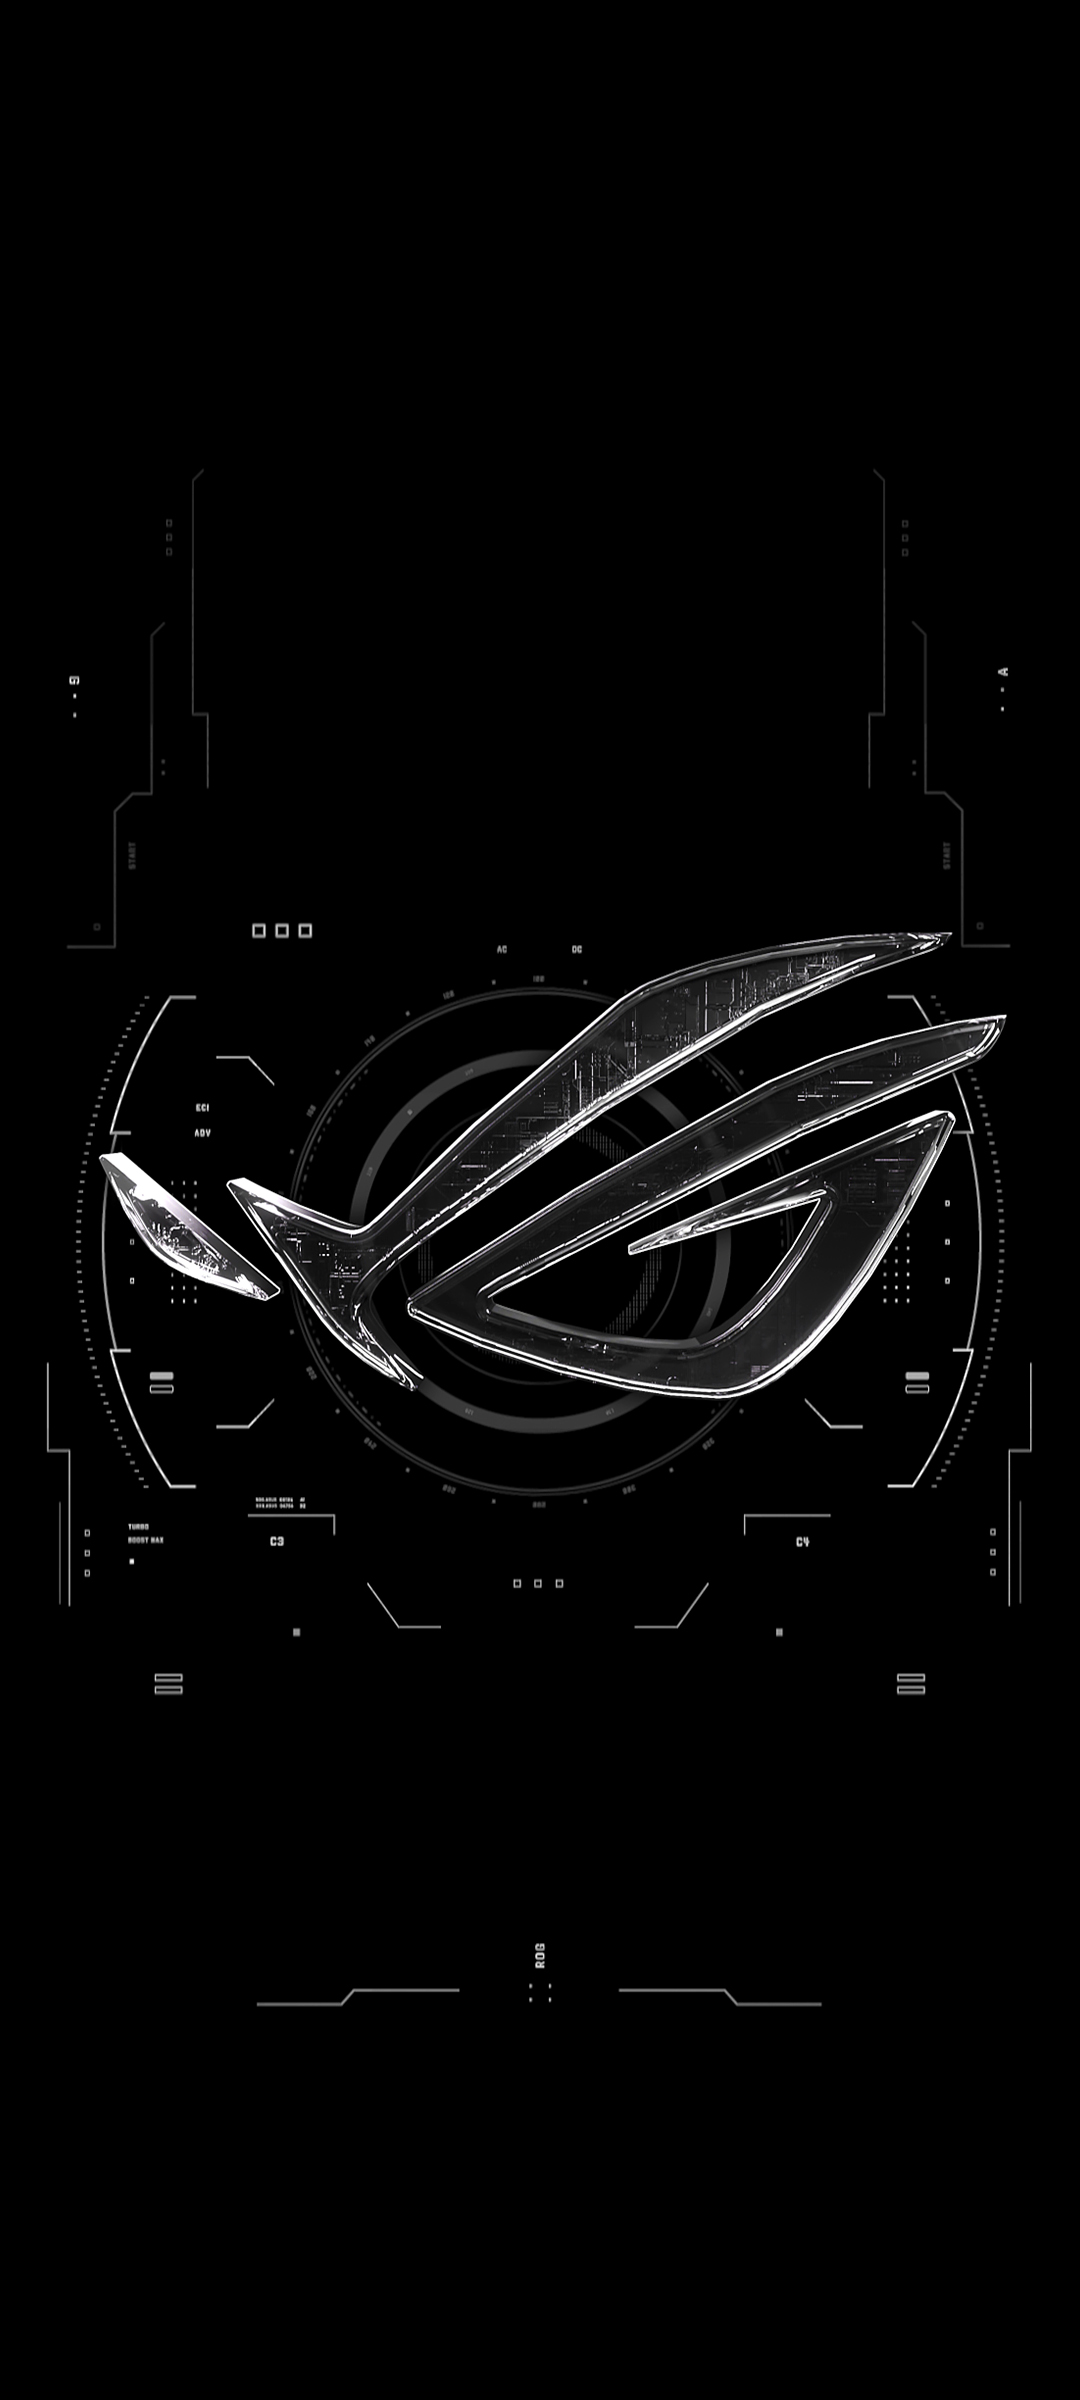 Asus ROG Phone 8 Pro wallpaper Resolution 1080x2400 | Best Download this awesome wallpaper - Cool Wallpaper HD - CoolWallpaper-HD.com